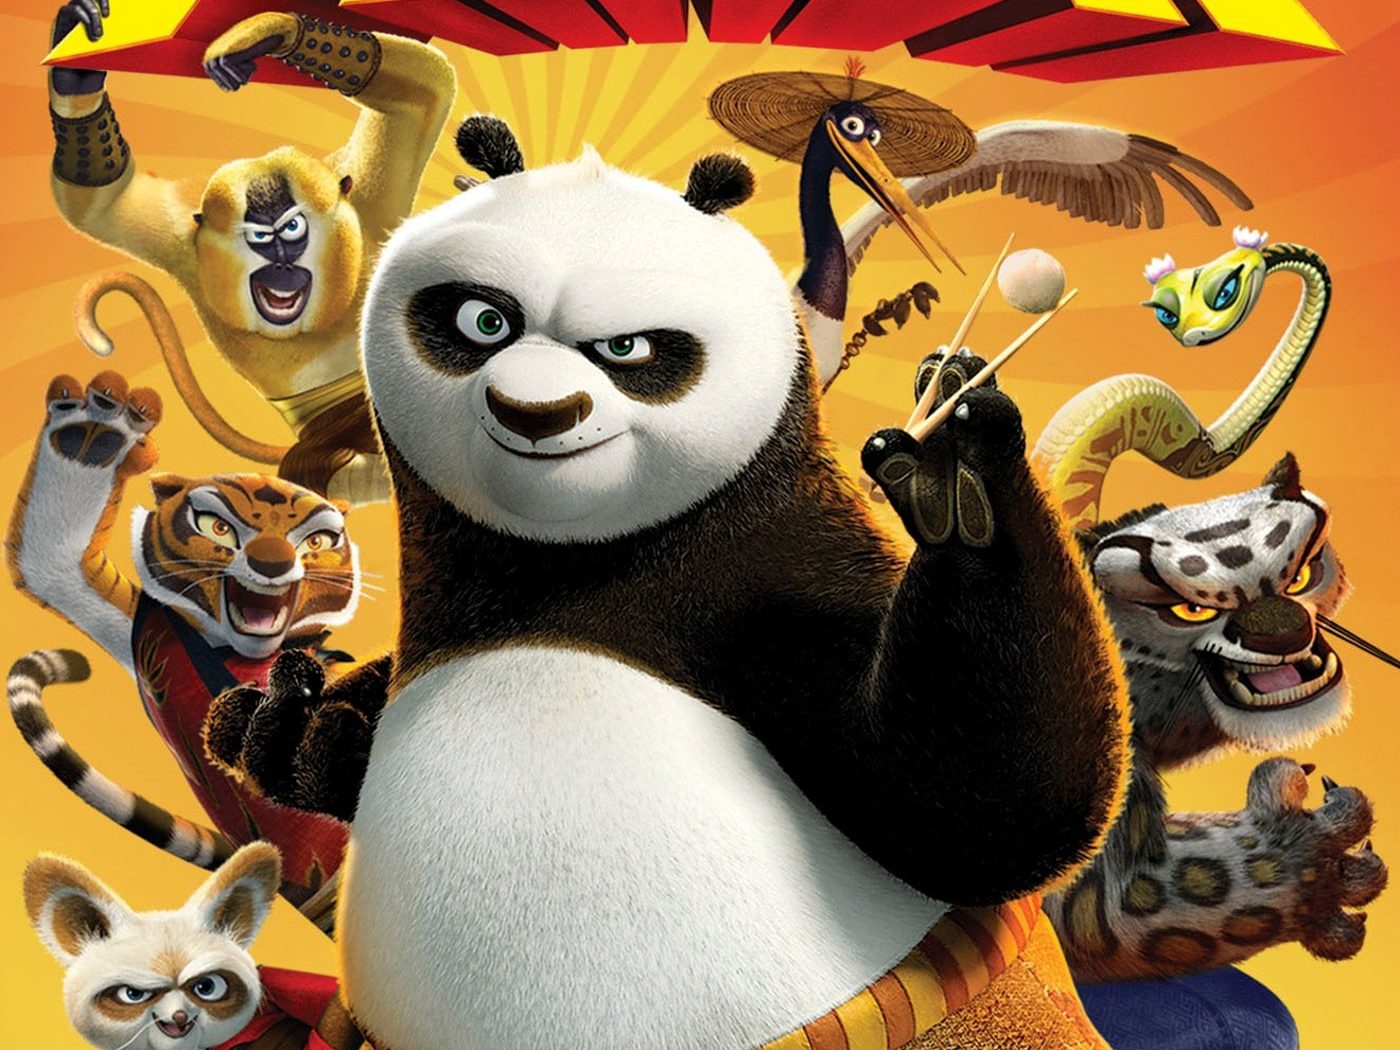 Poster for the movie "Kung Fu Panda"